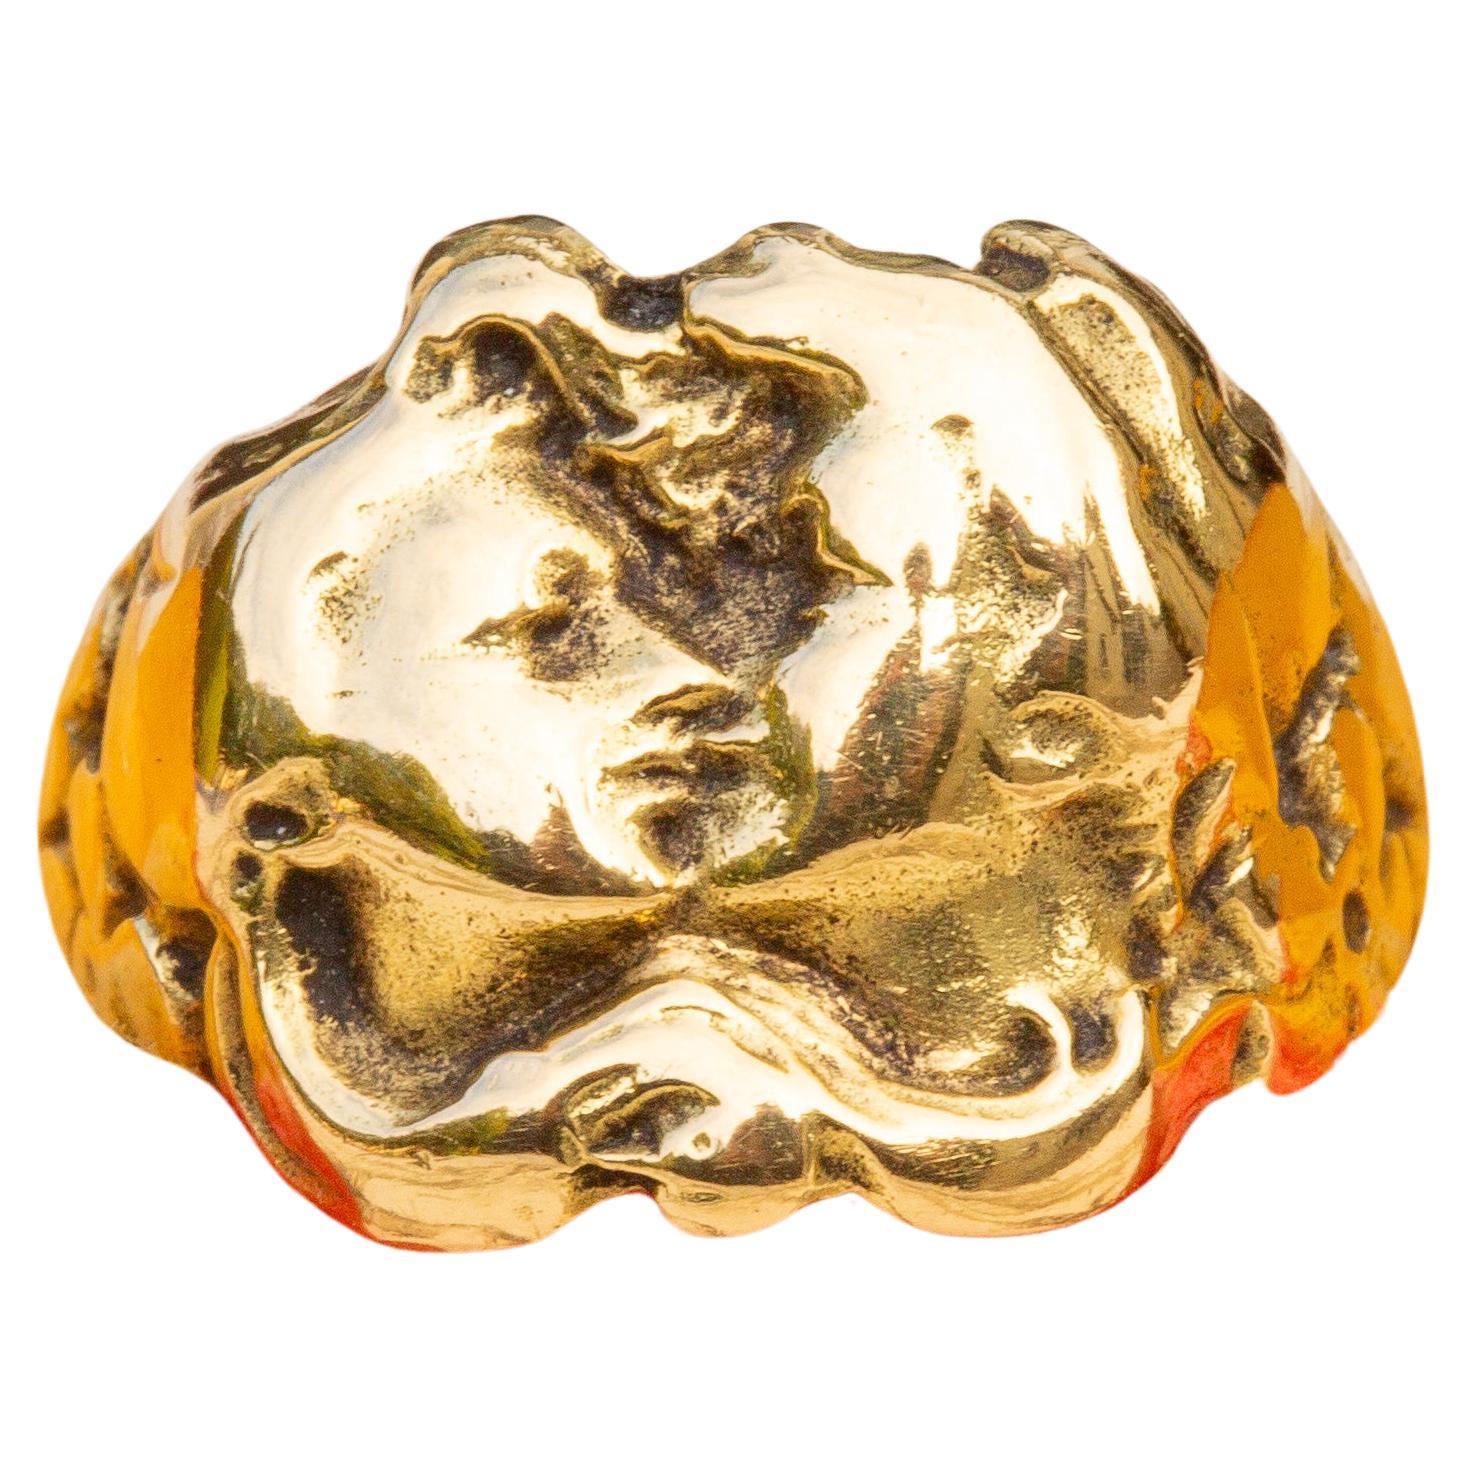  French Antique Art Nouveau 18K Gold Ethereal Figural Kissing Ring c.1910